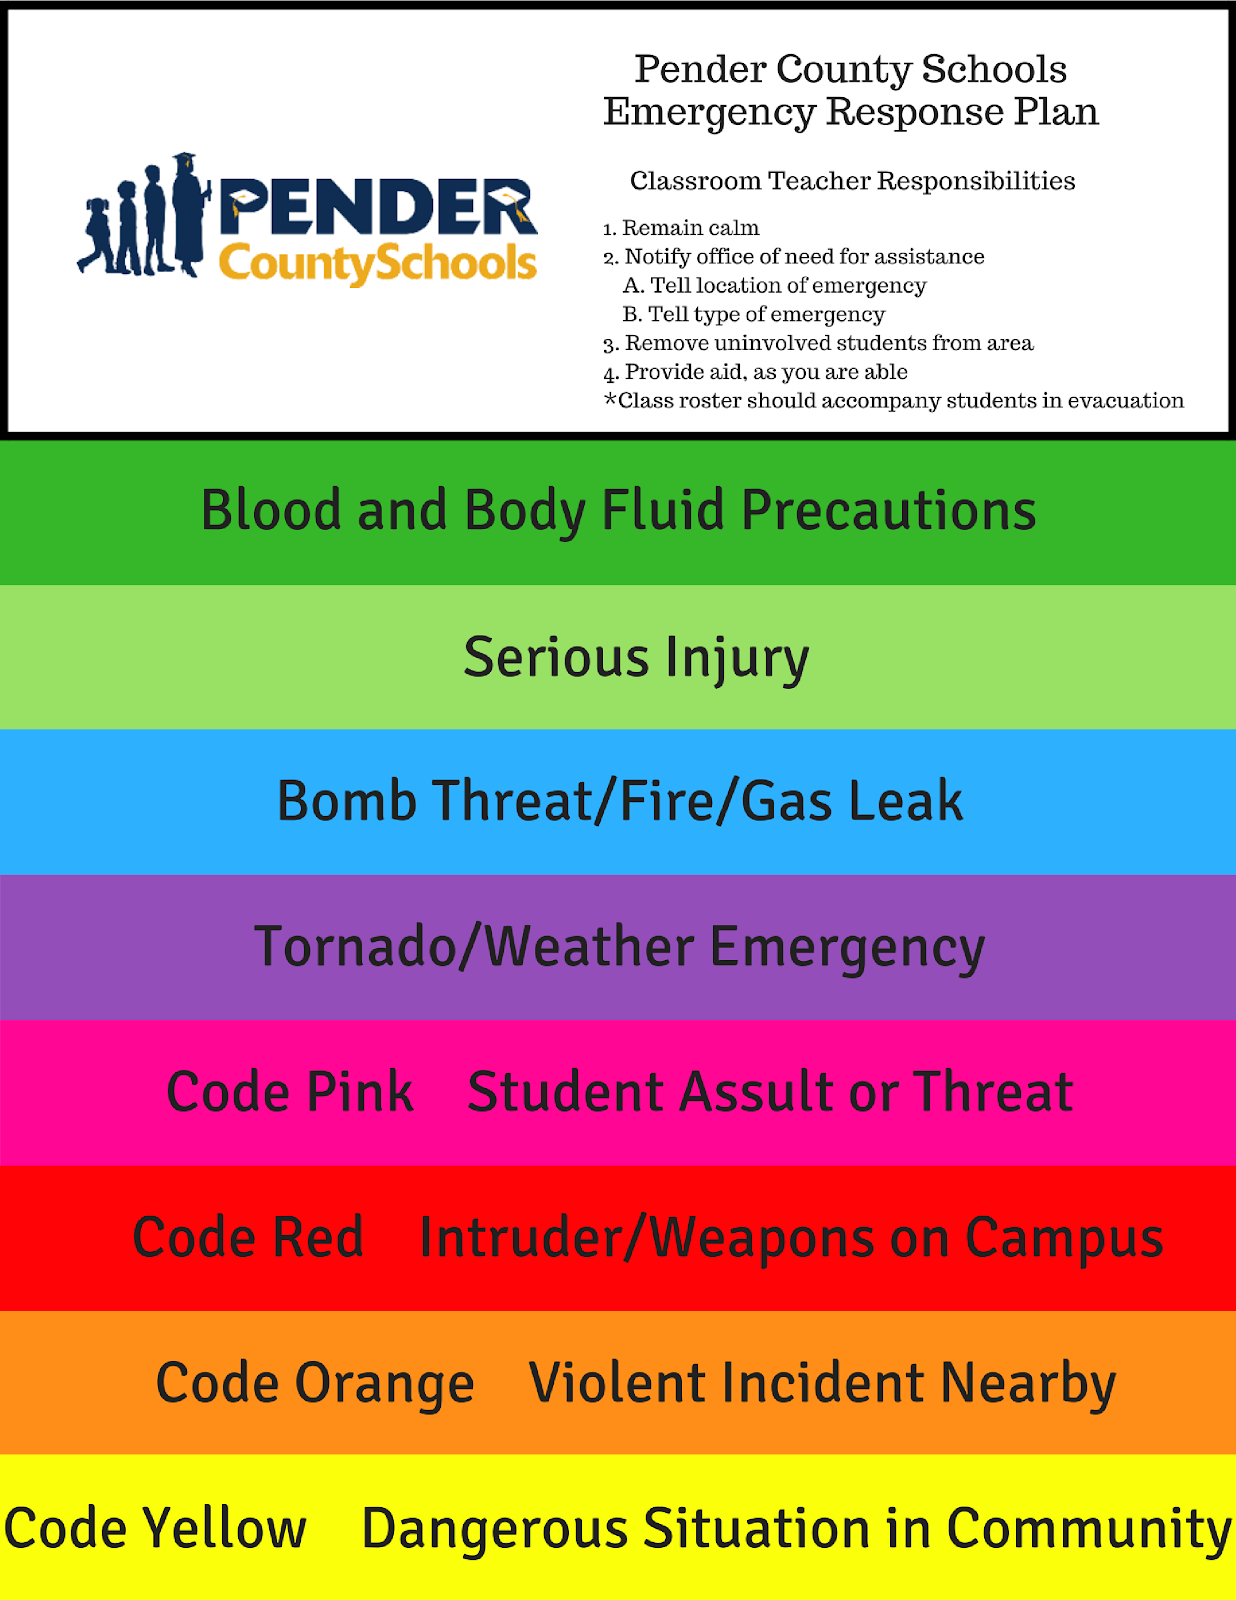 safety-pender-county-schools